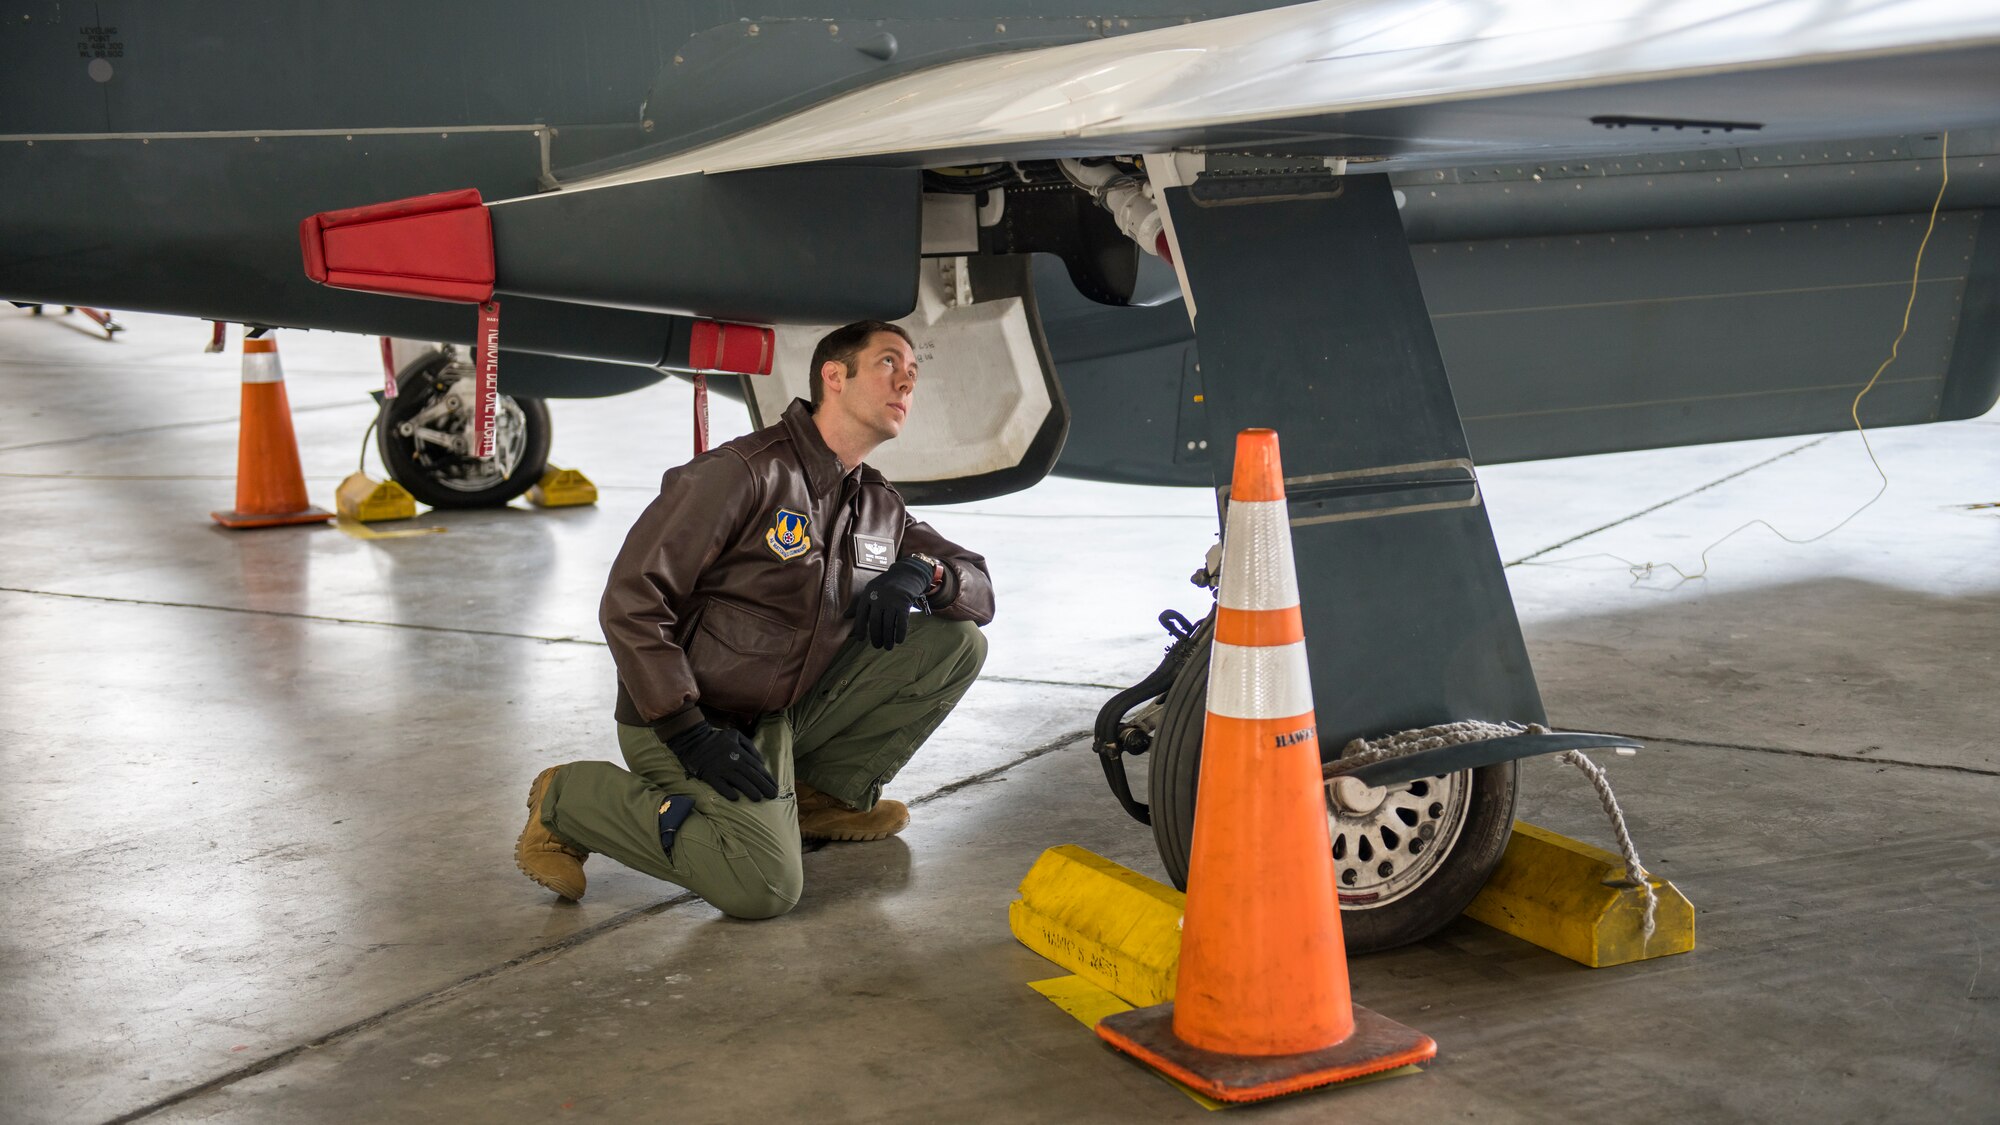 Maj. Marc Nichols, 452nd Flight Test Squadron Assistant Director of Operations, conducts a walk-through inspection of an RQ-4 Global Hawk remotely-piloted aircraft at Edwards Air Force Base, California, April 6. (Air Force photo by Giancarlo Casem)